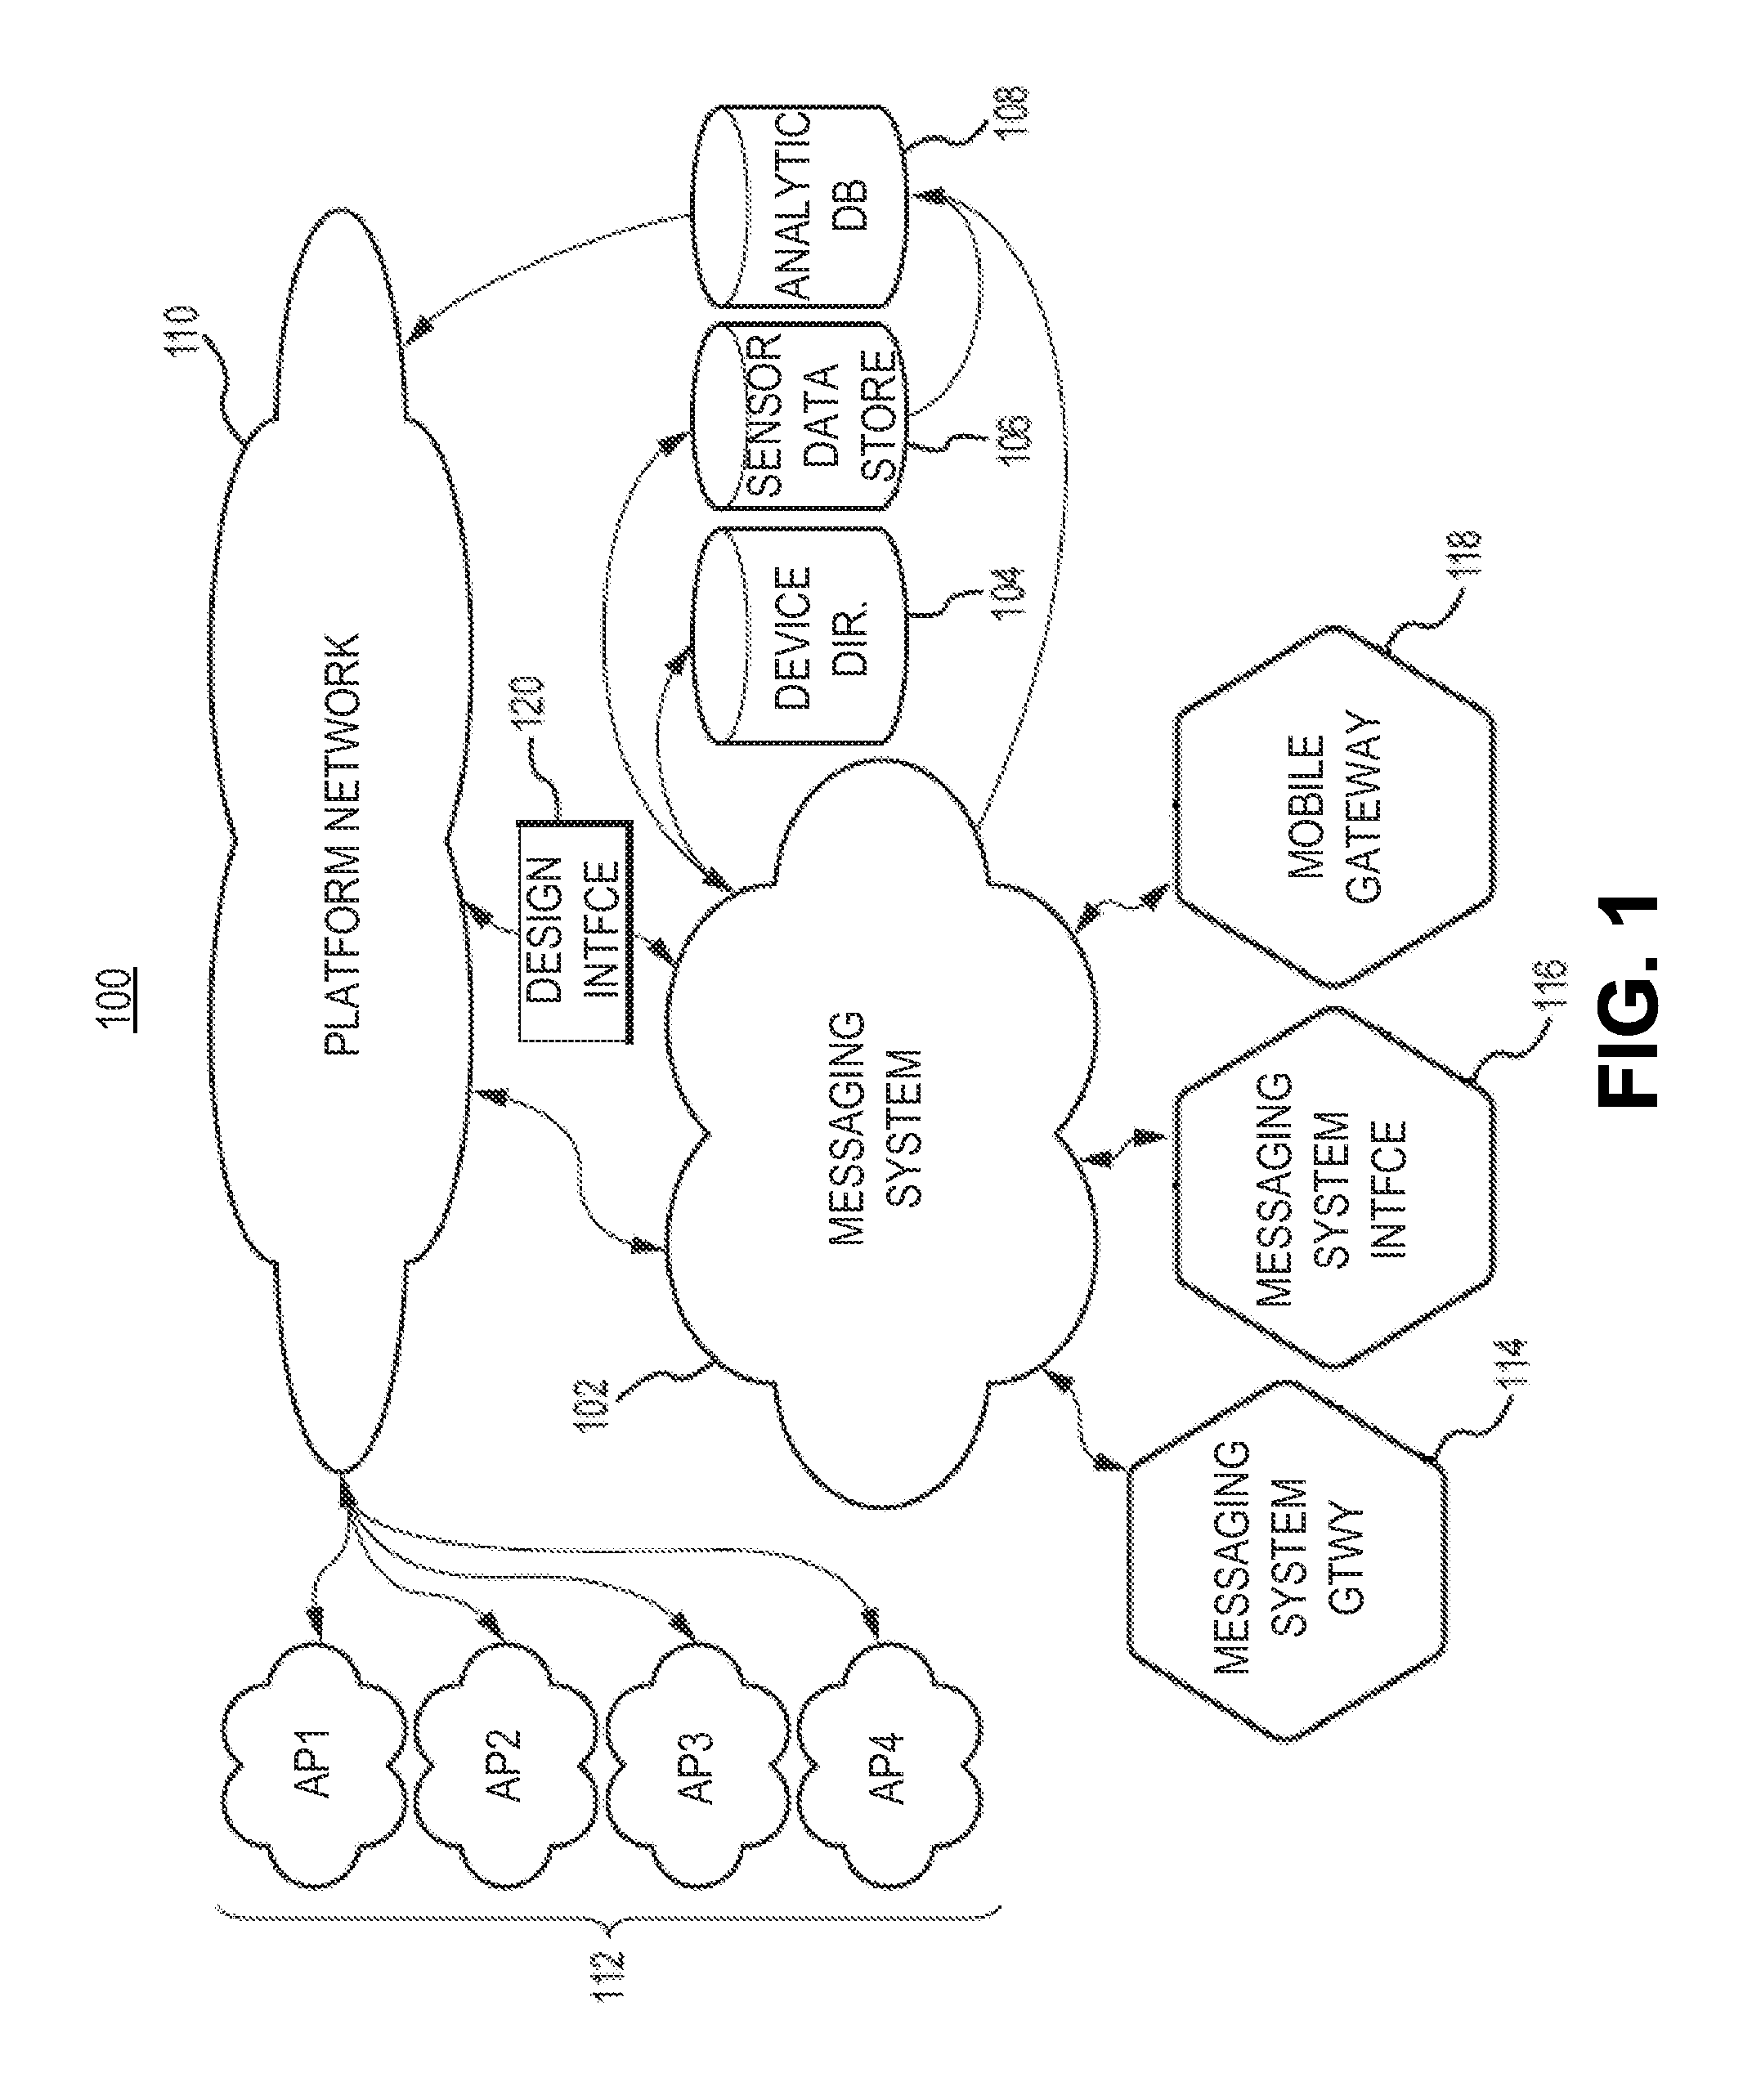 Security profile management in a machine-to-machine messaging system